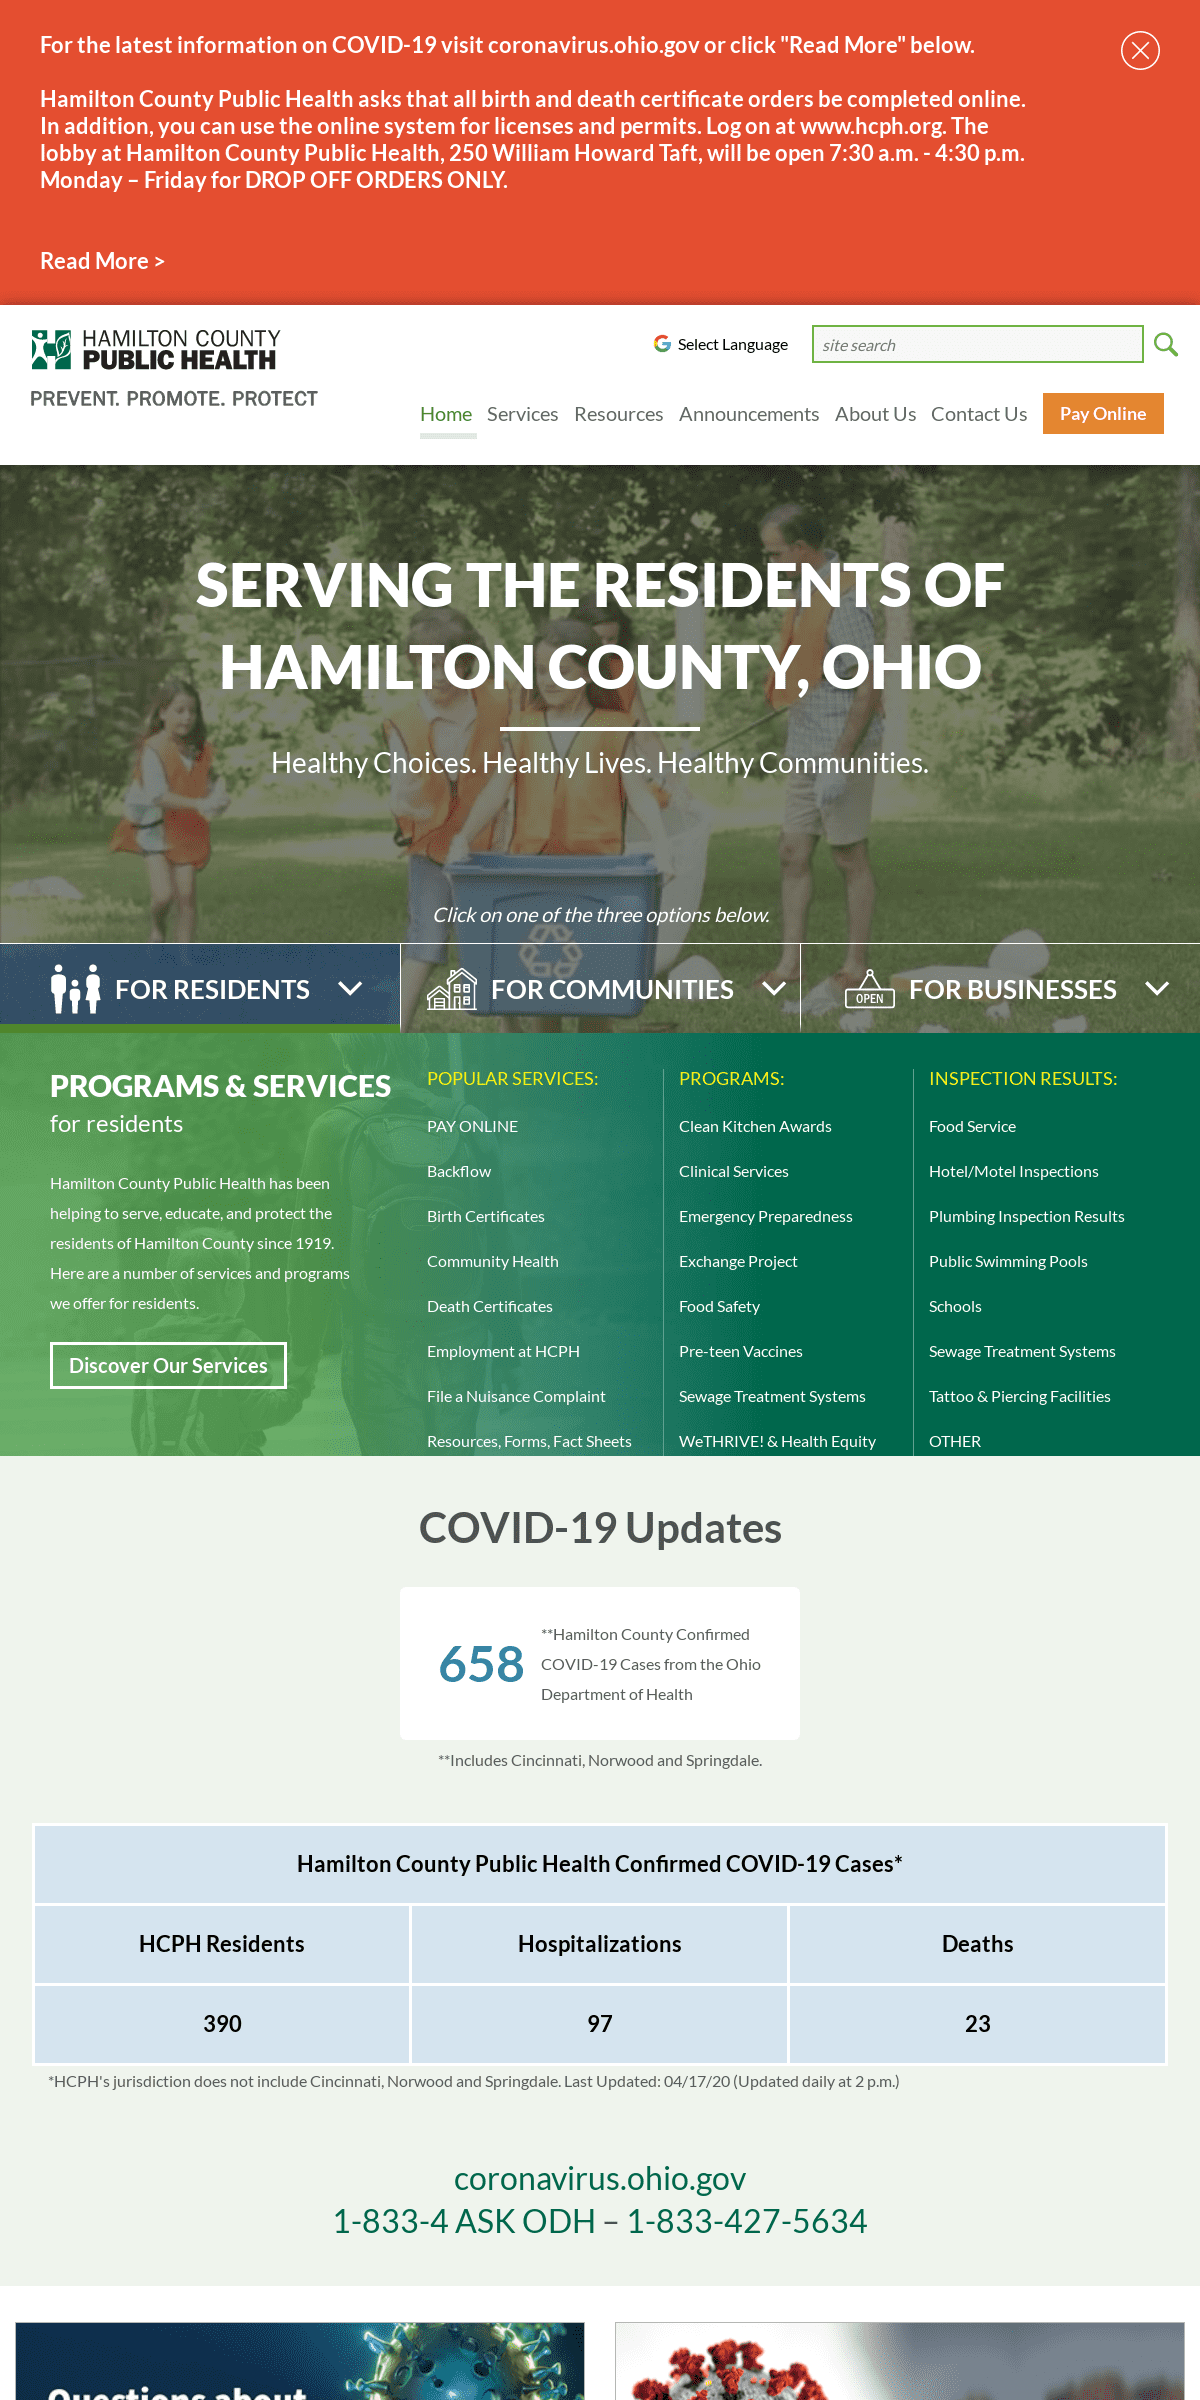 A complete backup of hamiltoncountyhealth.org